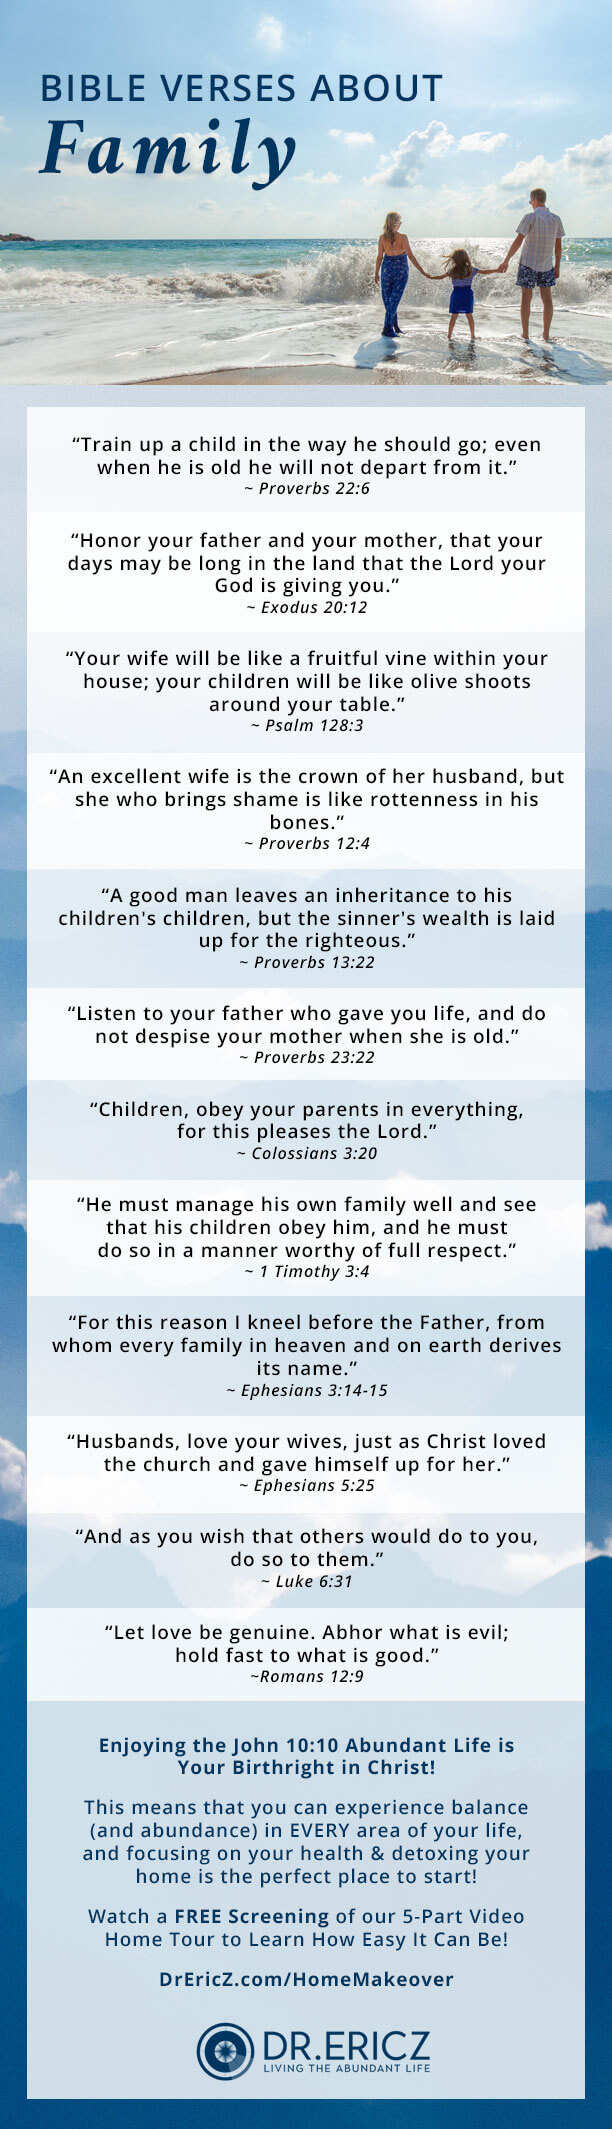 Quote From The Bible About Family
 Bible Verses About Family